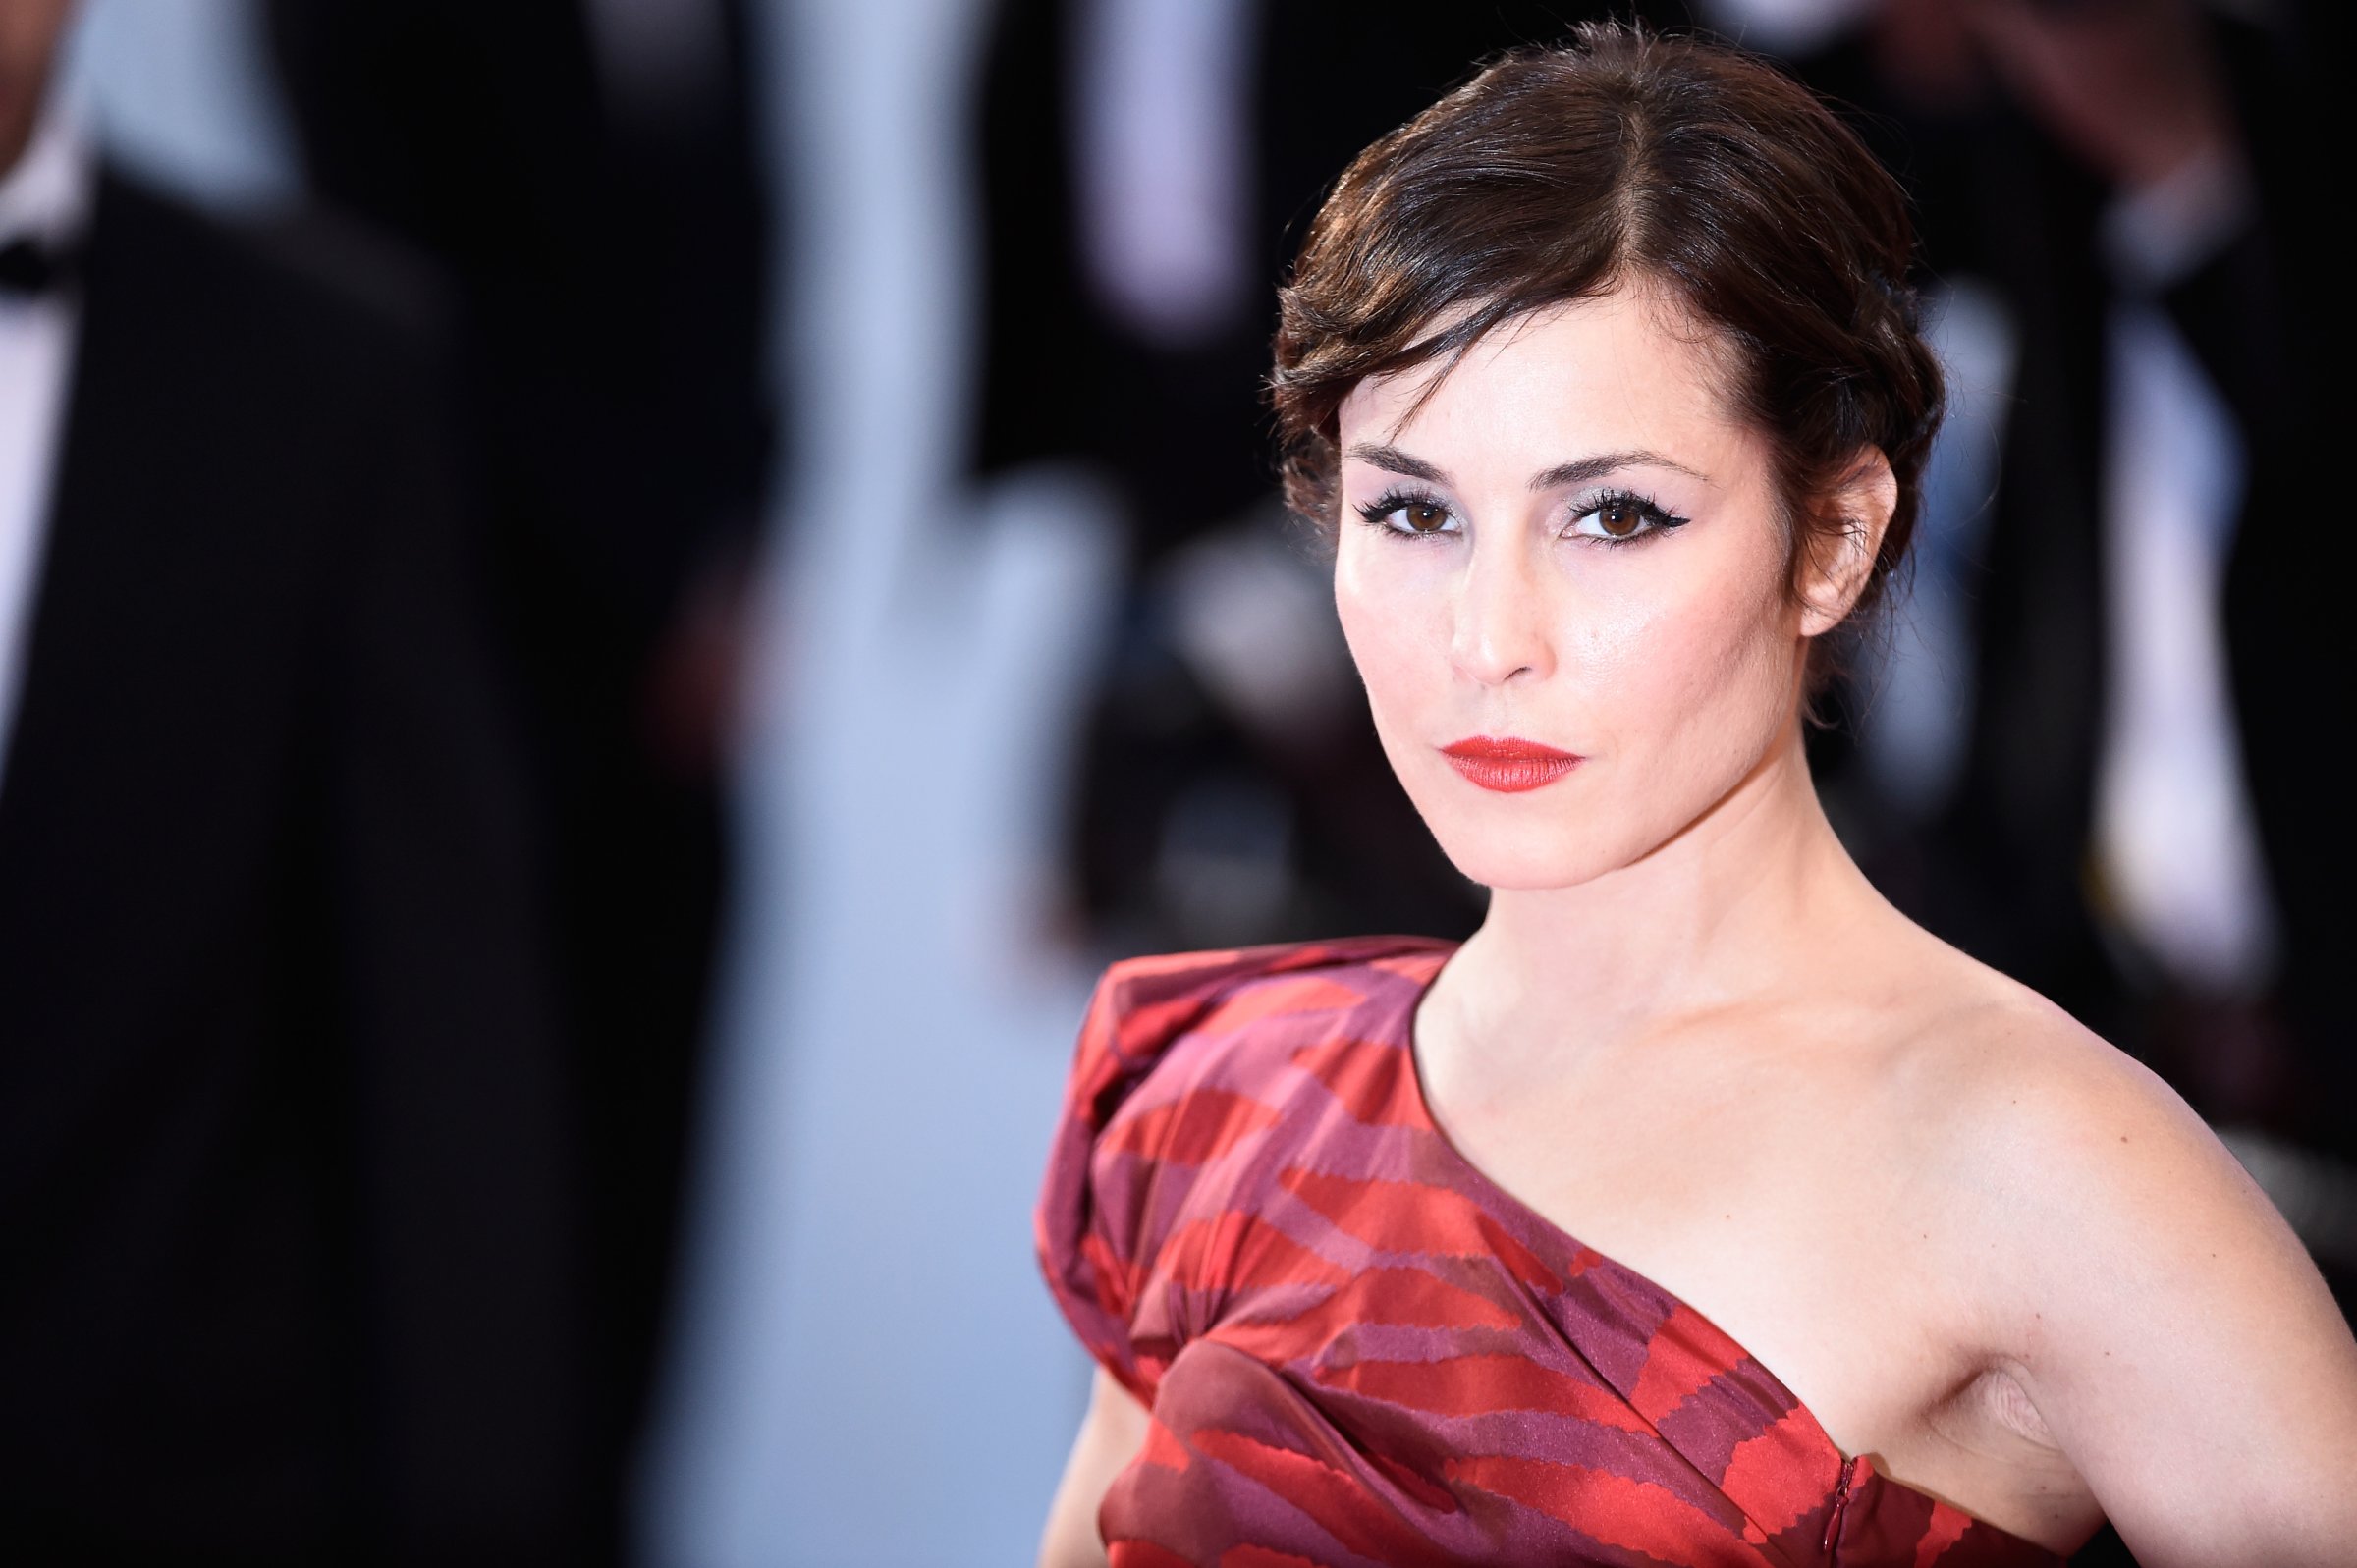 Noomi Rapace attends the Premiere of "The Sea Of Trees" during the 68th annual Cannes Film Festival